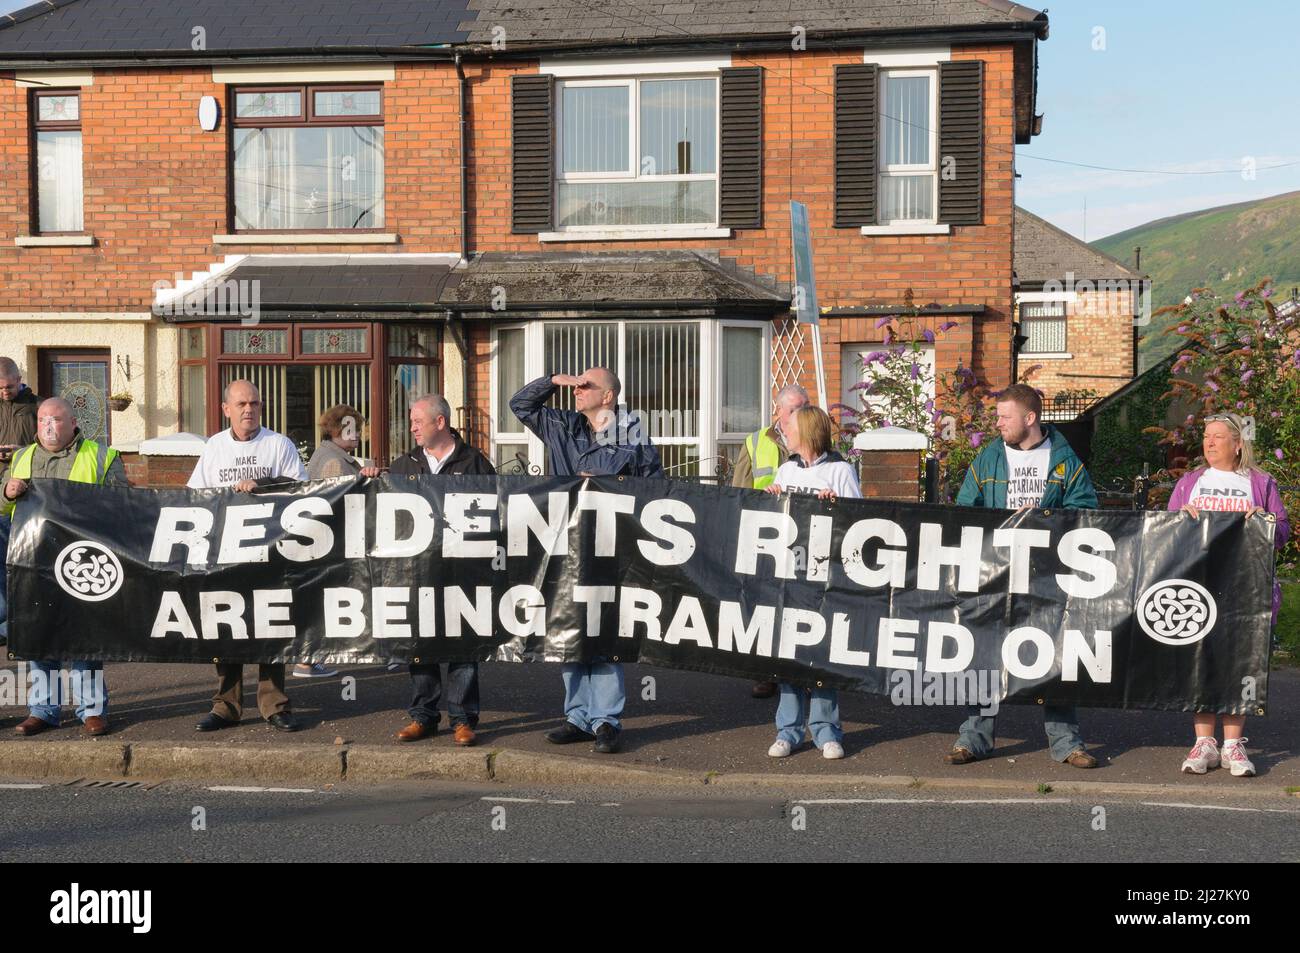 14/08/2010, Crumlin Road, Belfast, Northern Ireland. Ardoyne residents hold a protest banner saying "Residents Rights are being trampled on" Stock Photo